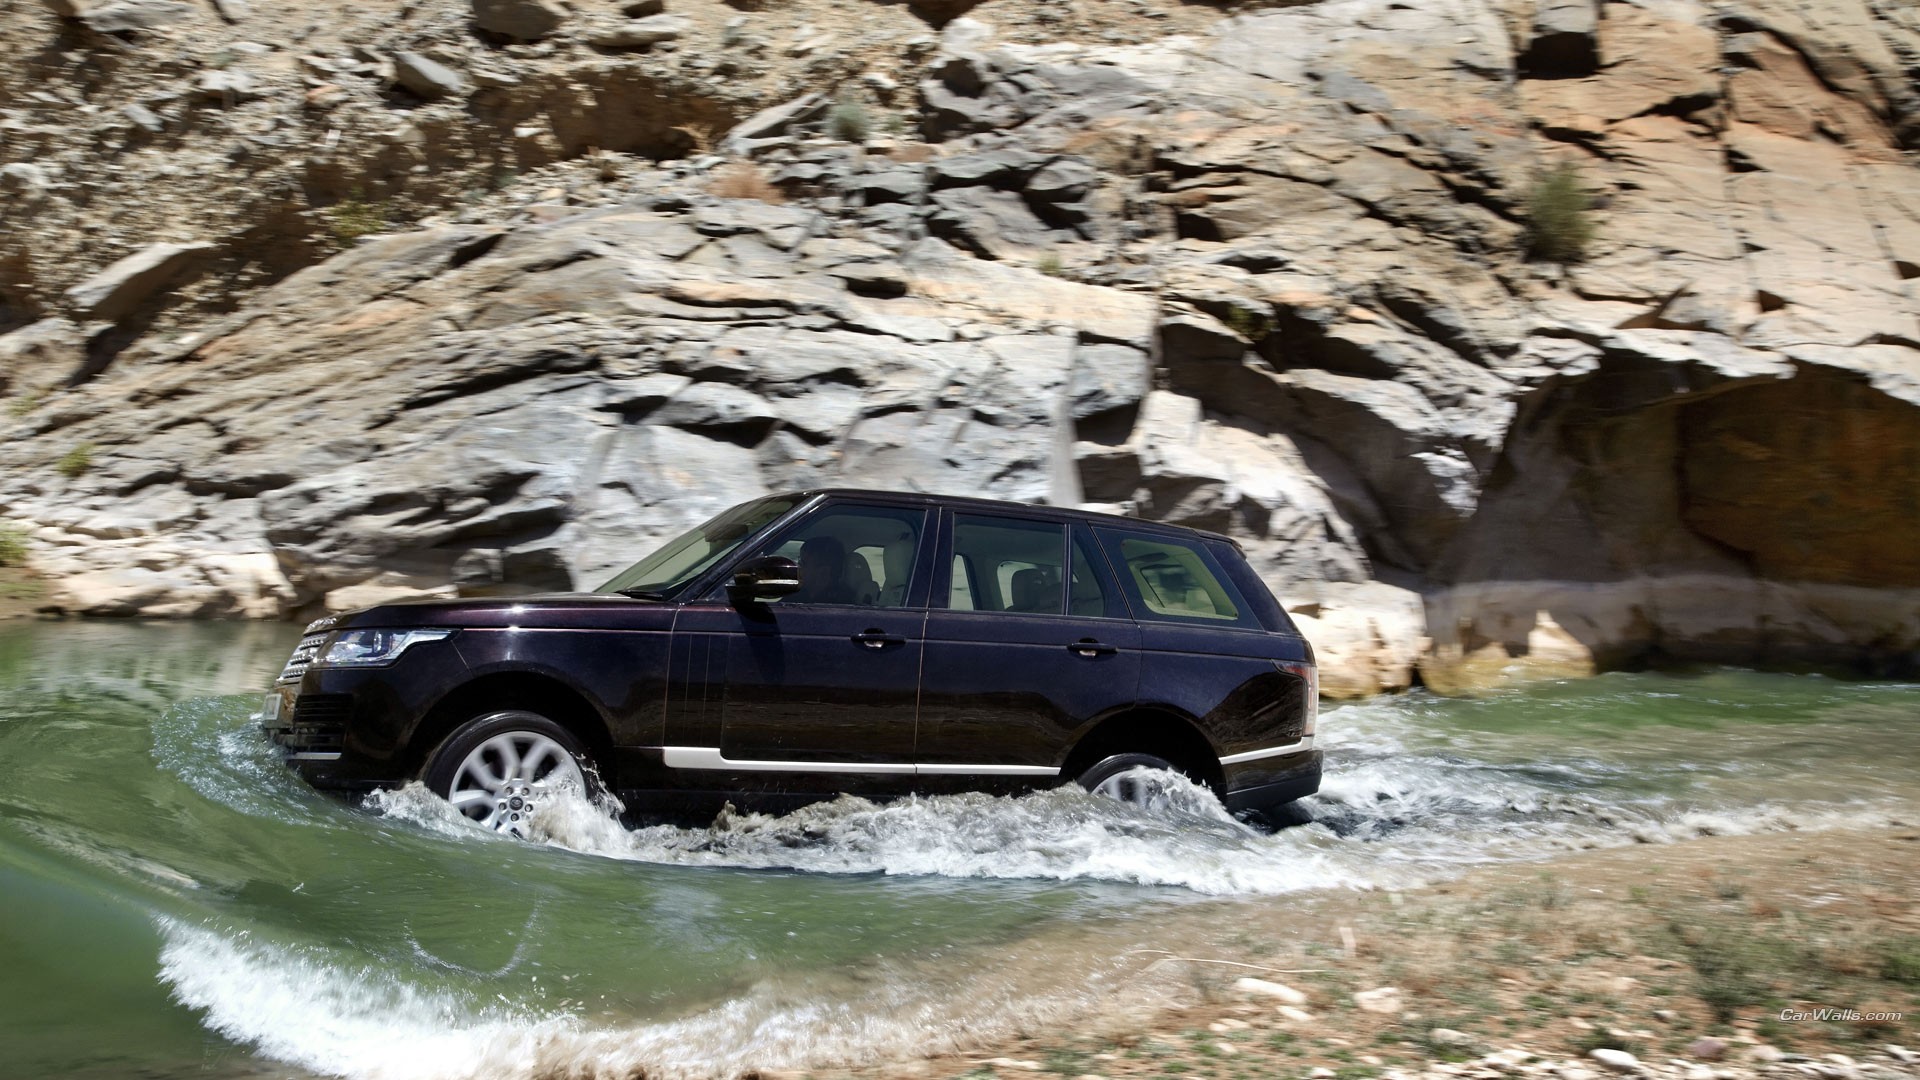 General 1920x1080 Range Rover water car vehicle Land Rover offroad British cars SUV